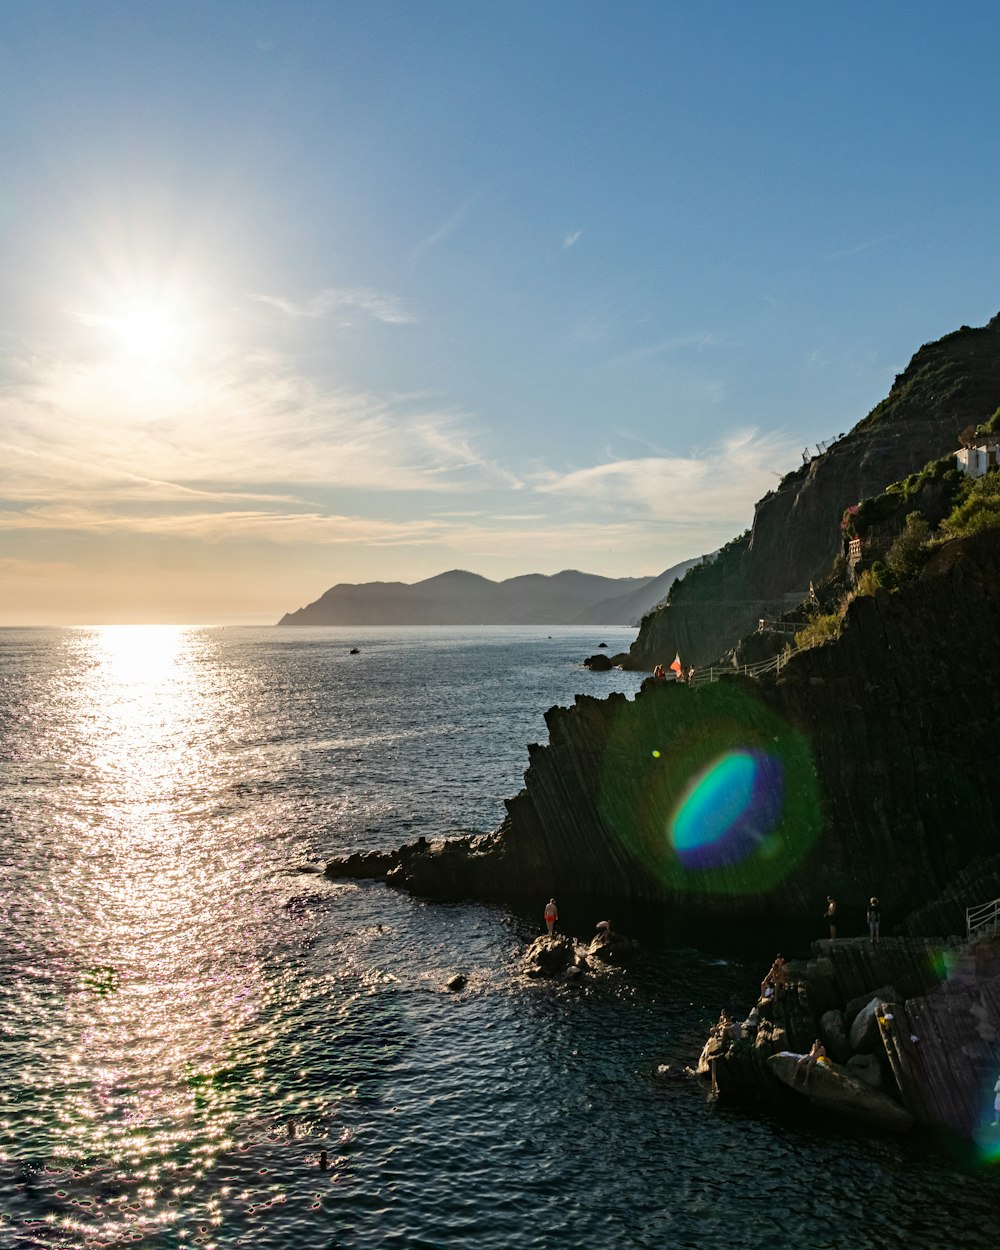 the sun shines brightly over the water near a rocky cliff